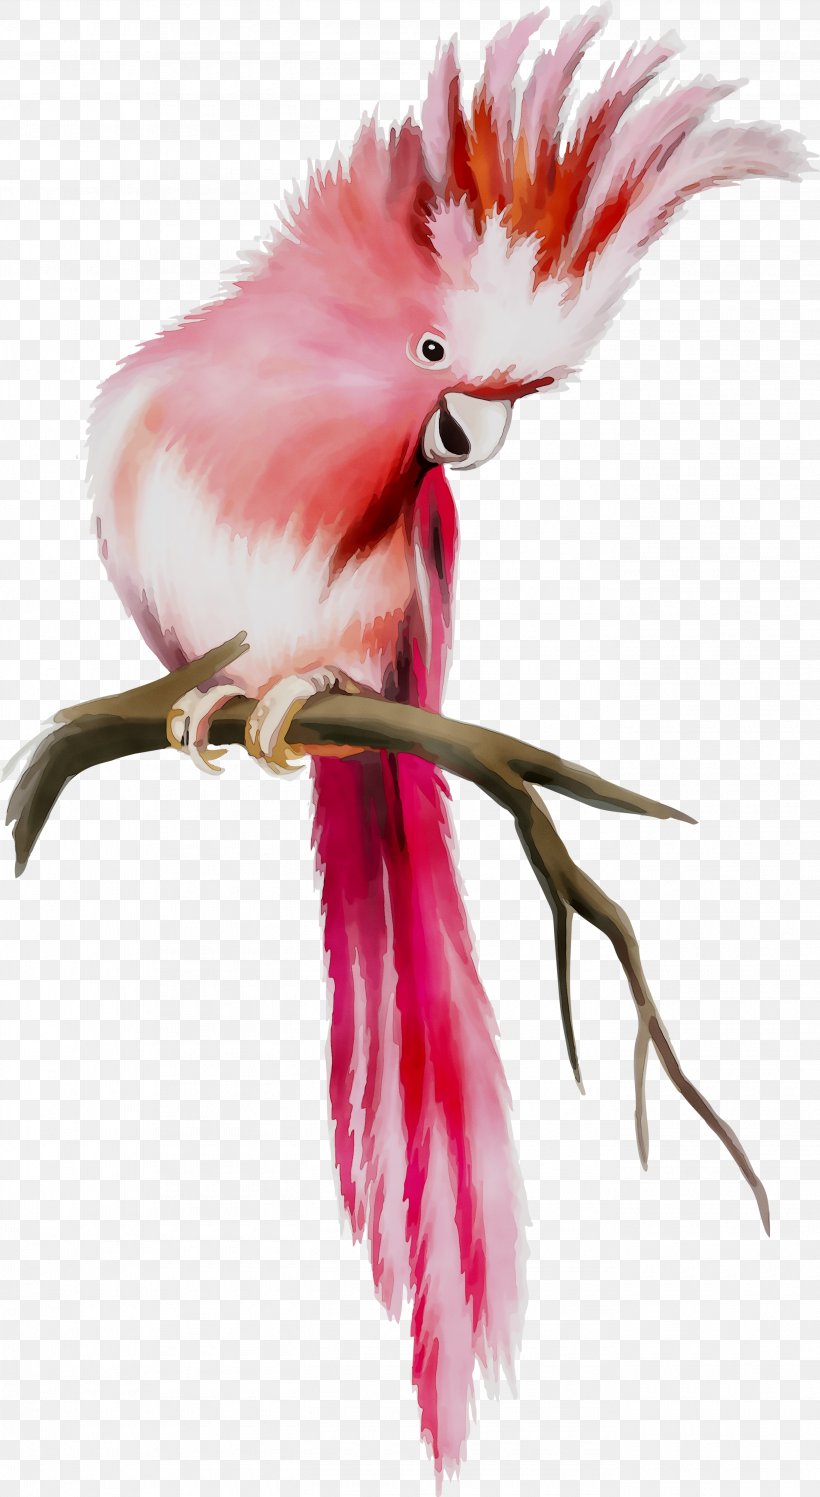 Illustration Feather Beak Chicken As Food, PNG, 2735x4995px, Feather, Beak, Bird, Chicken As Food, Cockatoo Download Free